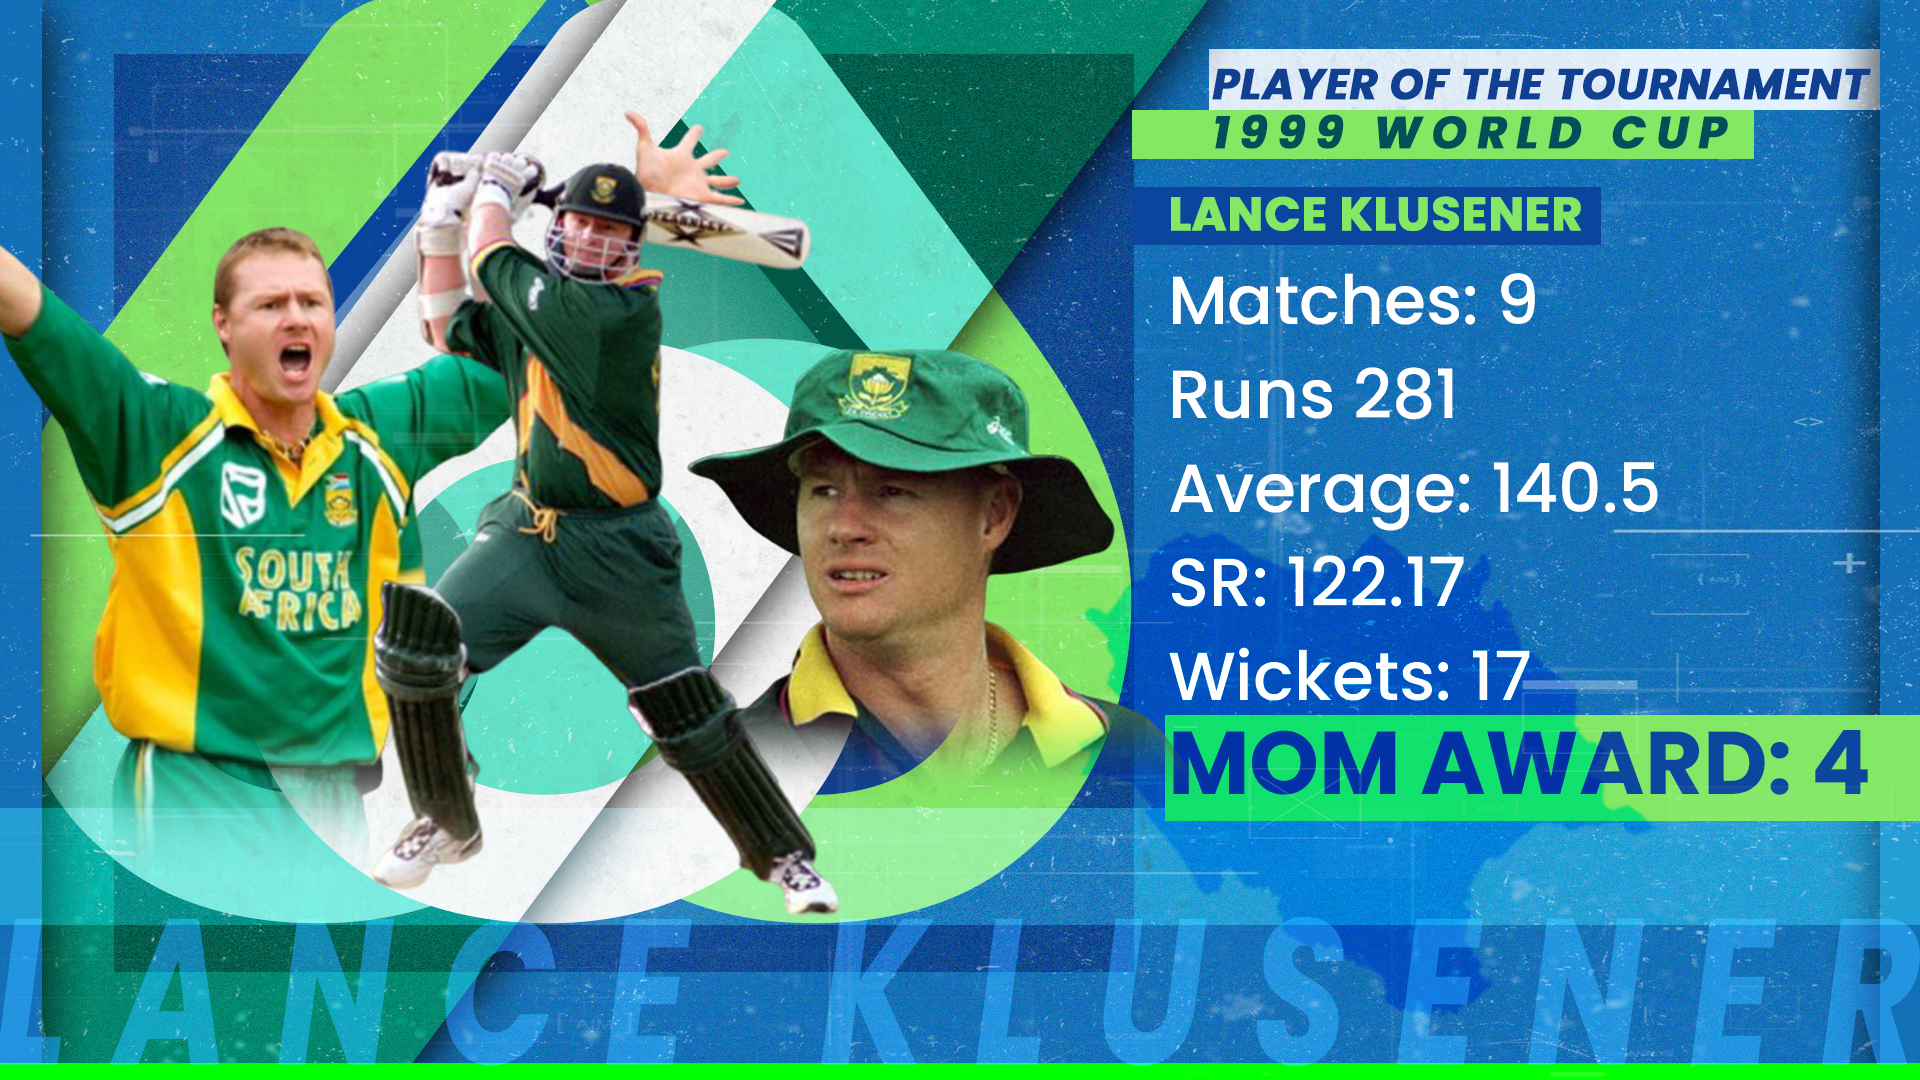 Lance Klusener won Player of the Tournament award in 1999 World Cup.